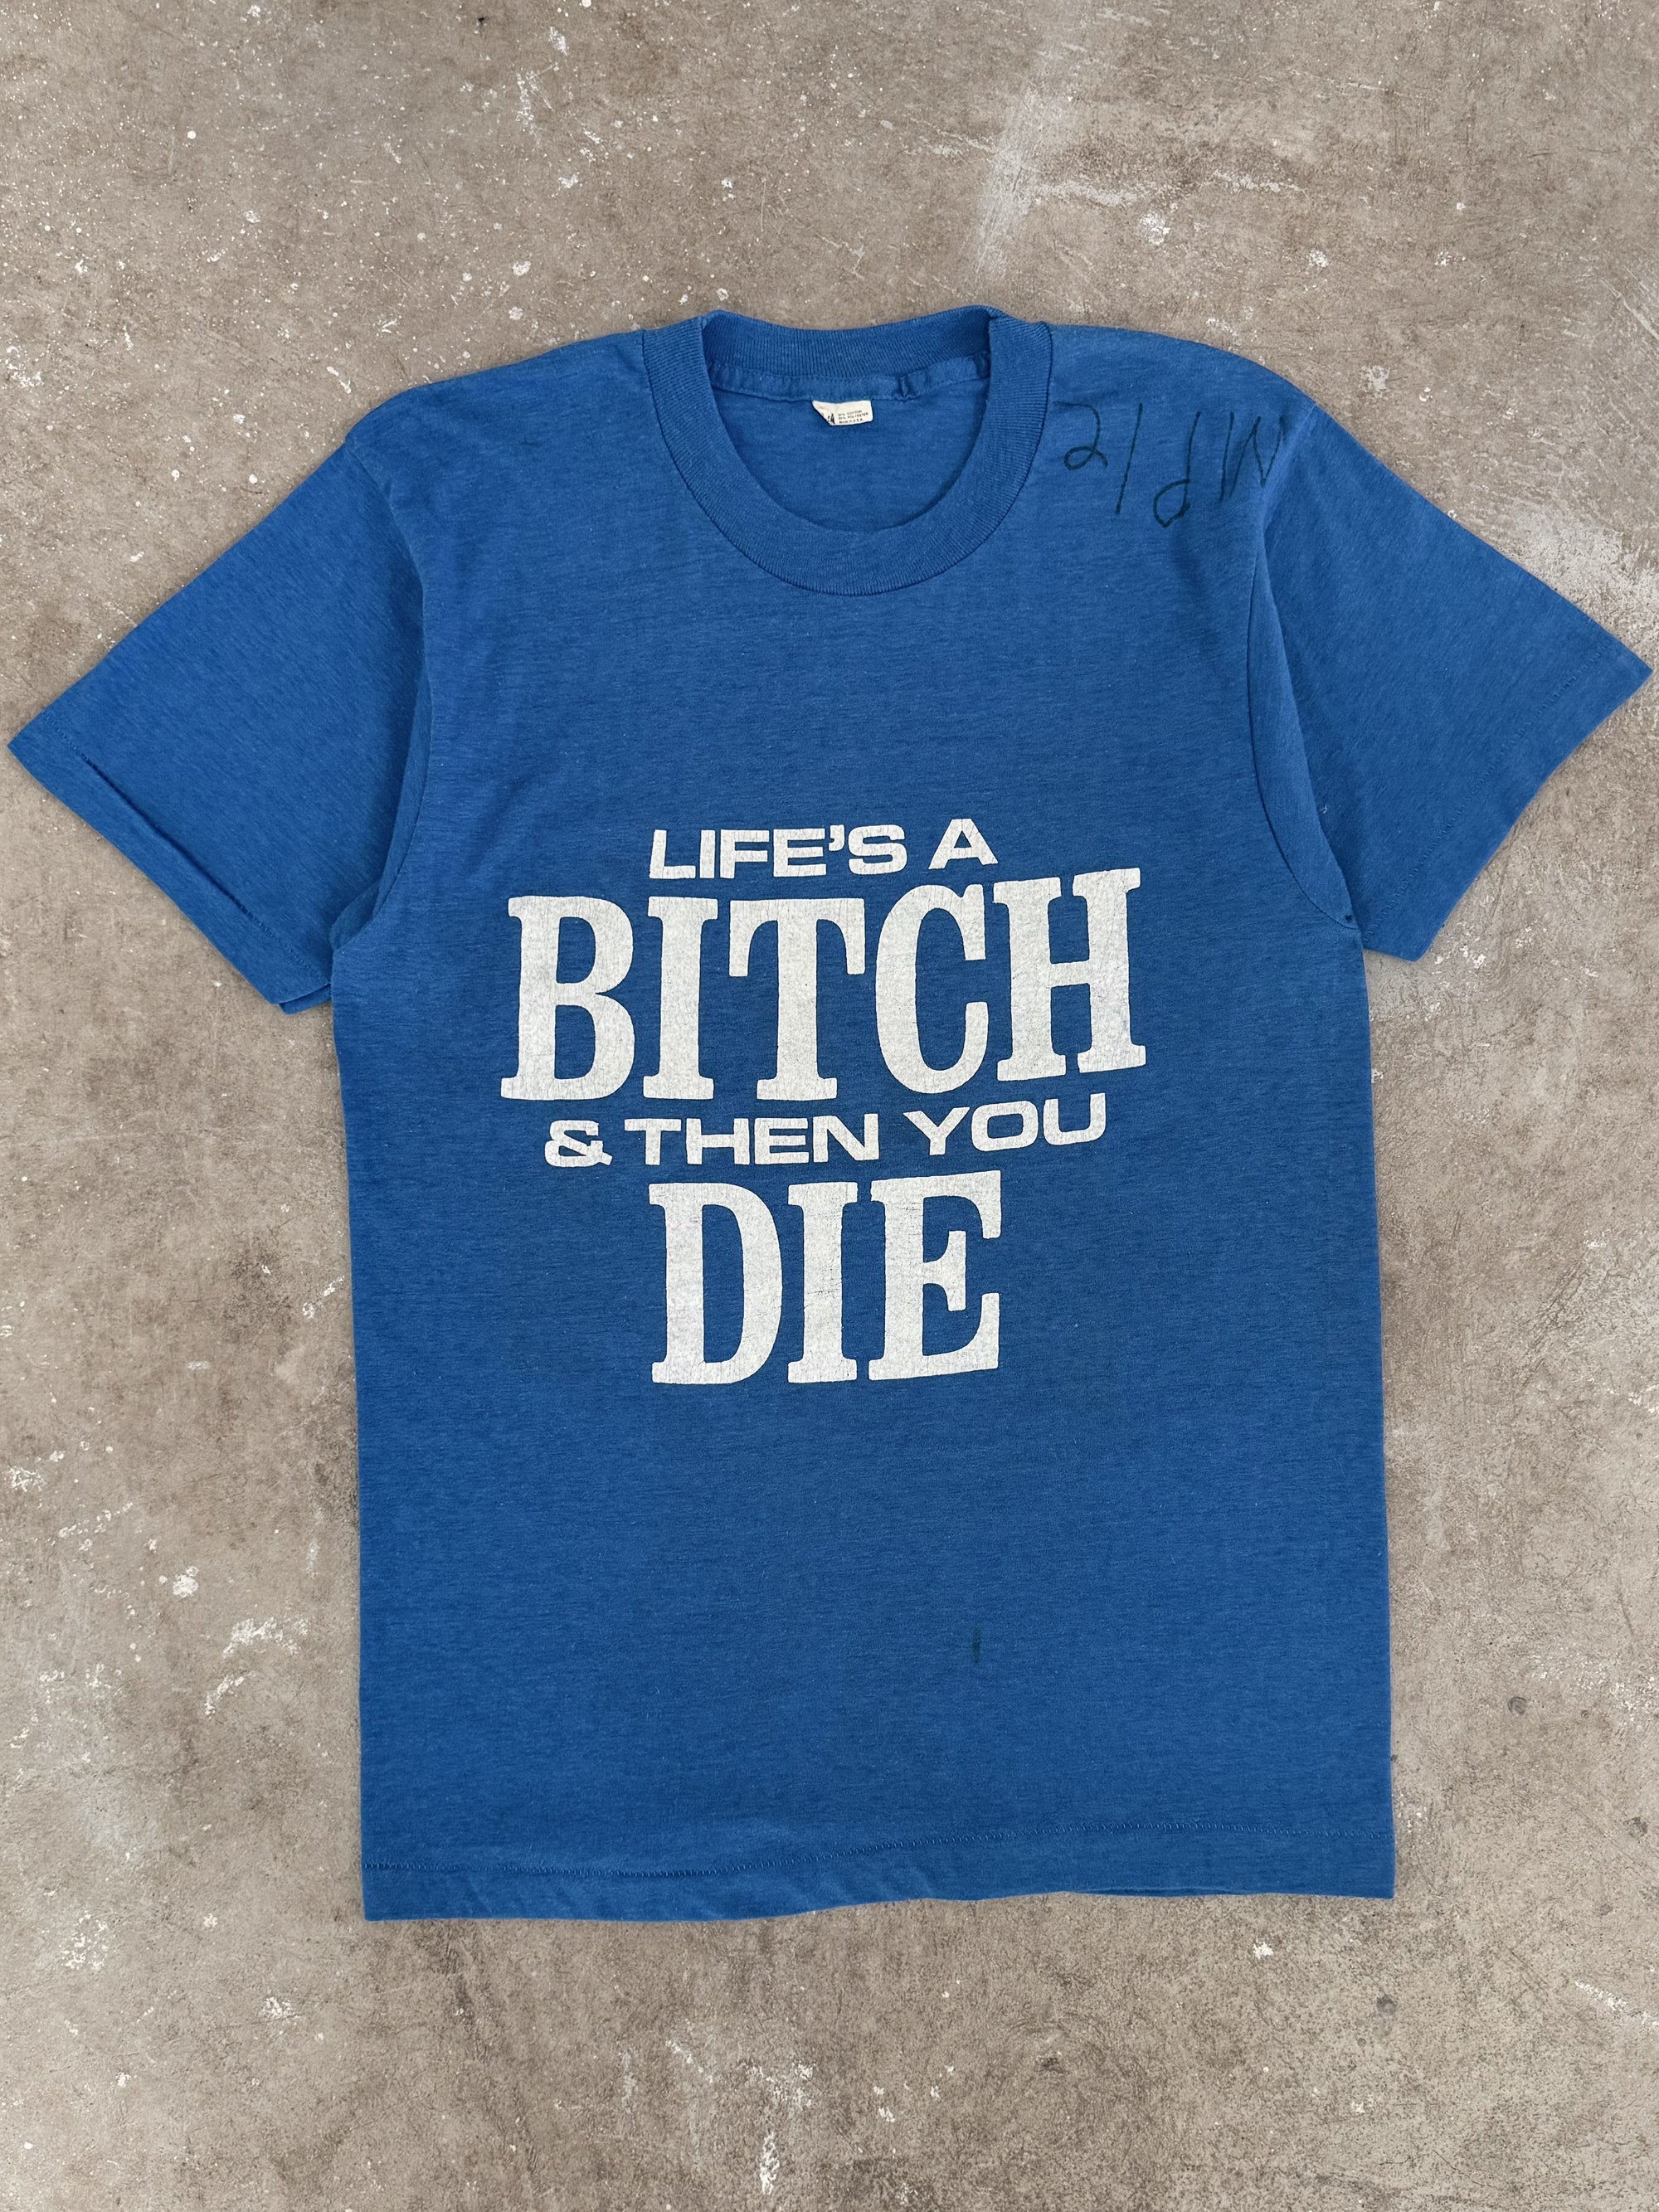 1980s "Life's A Bitch & Then You Die" Tee (S)